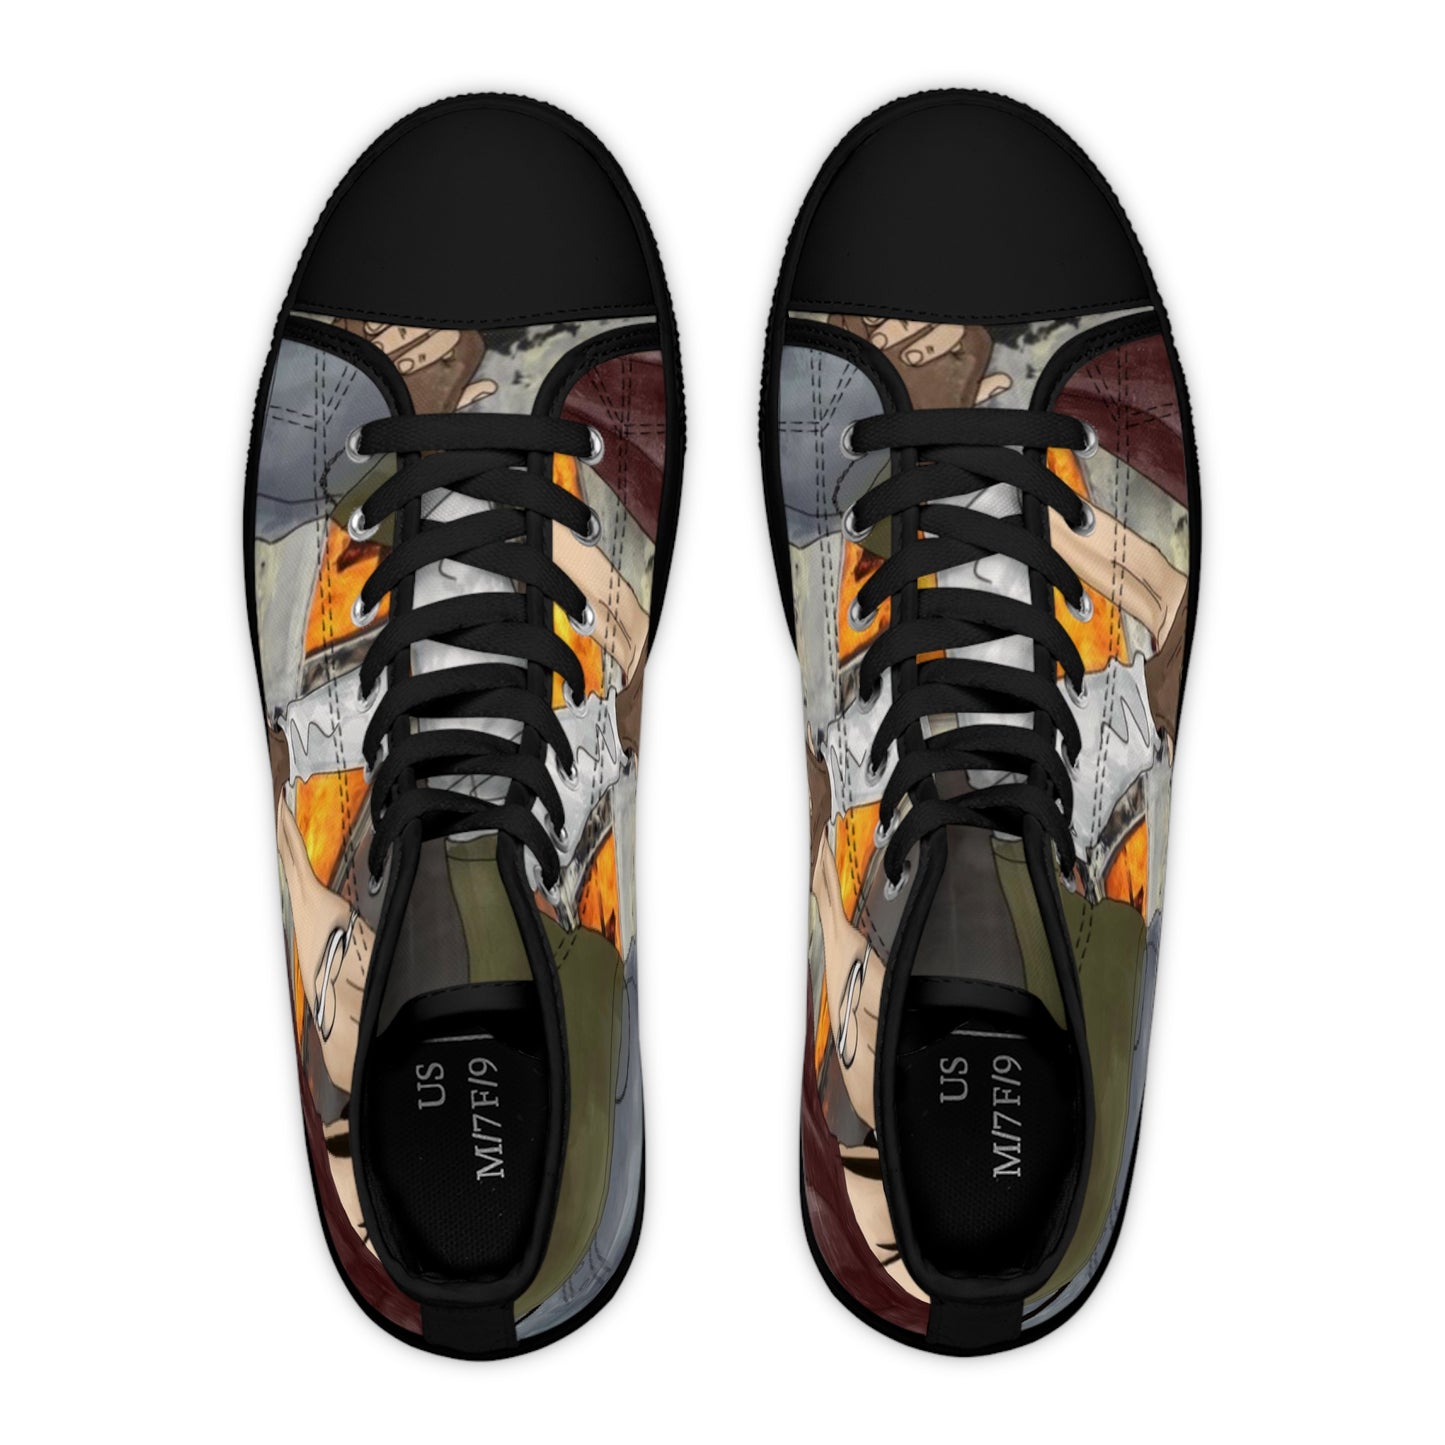 “Through hell and back” Women's High Top Sneakers